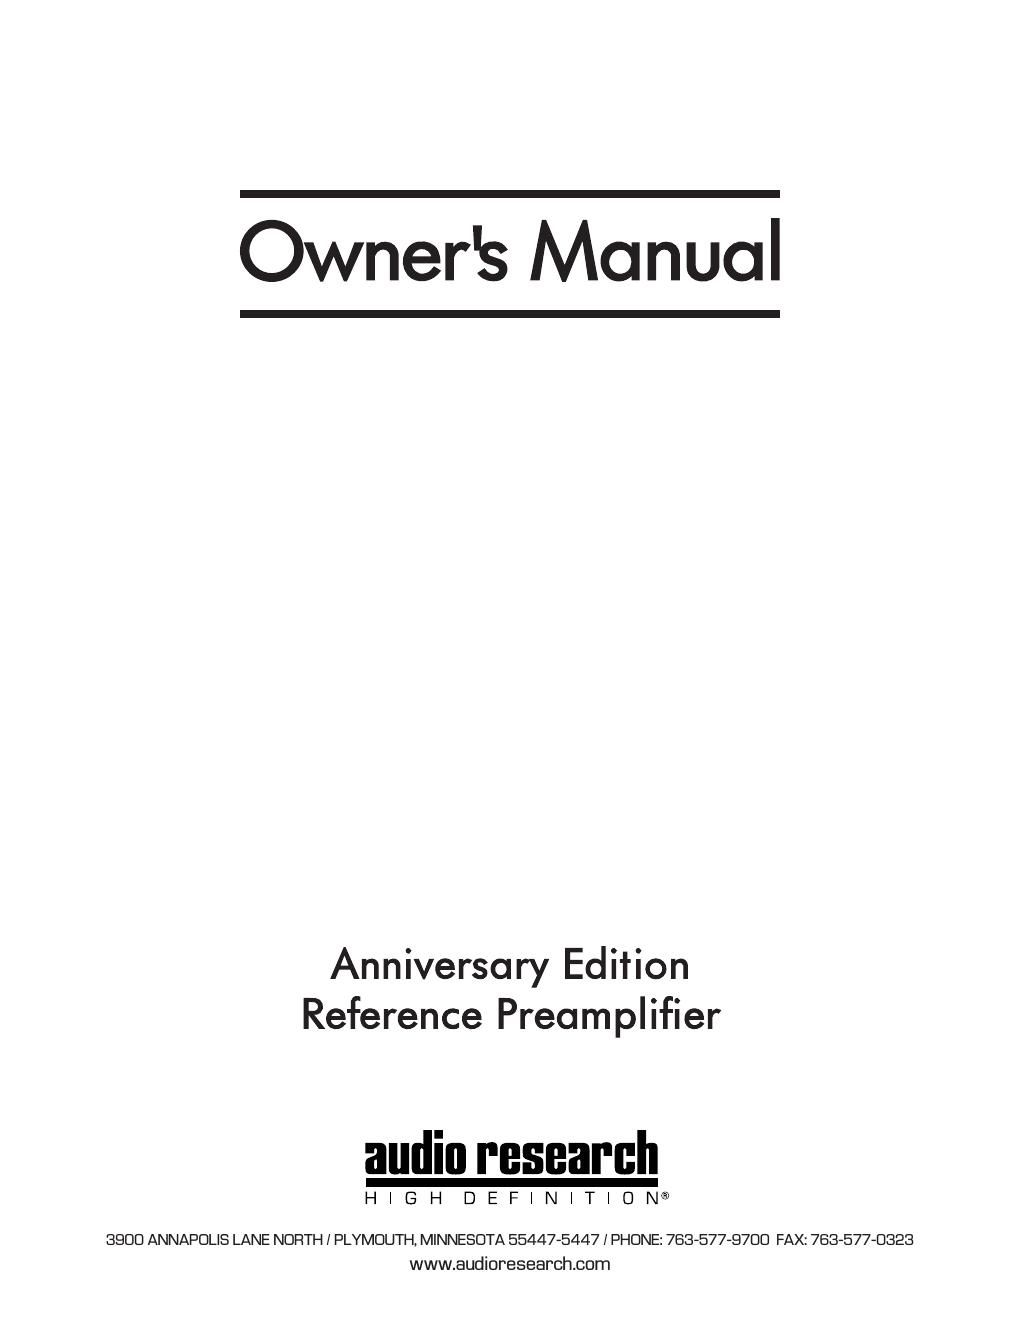 audio research ref preamp anniversary edition owners manual